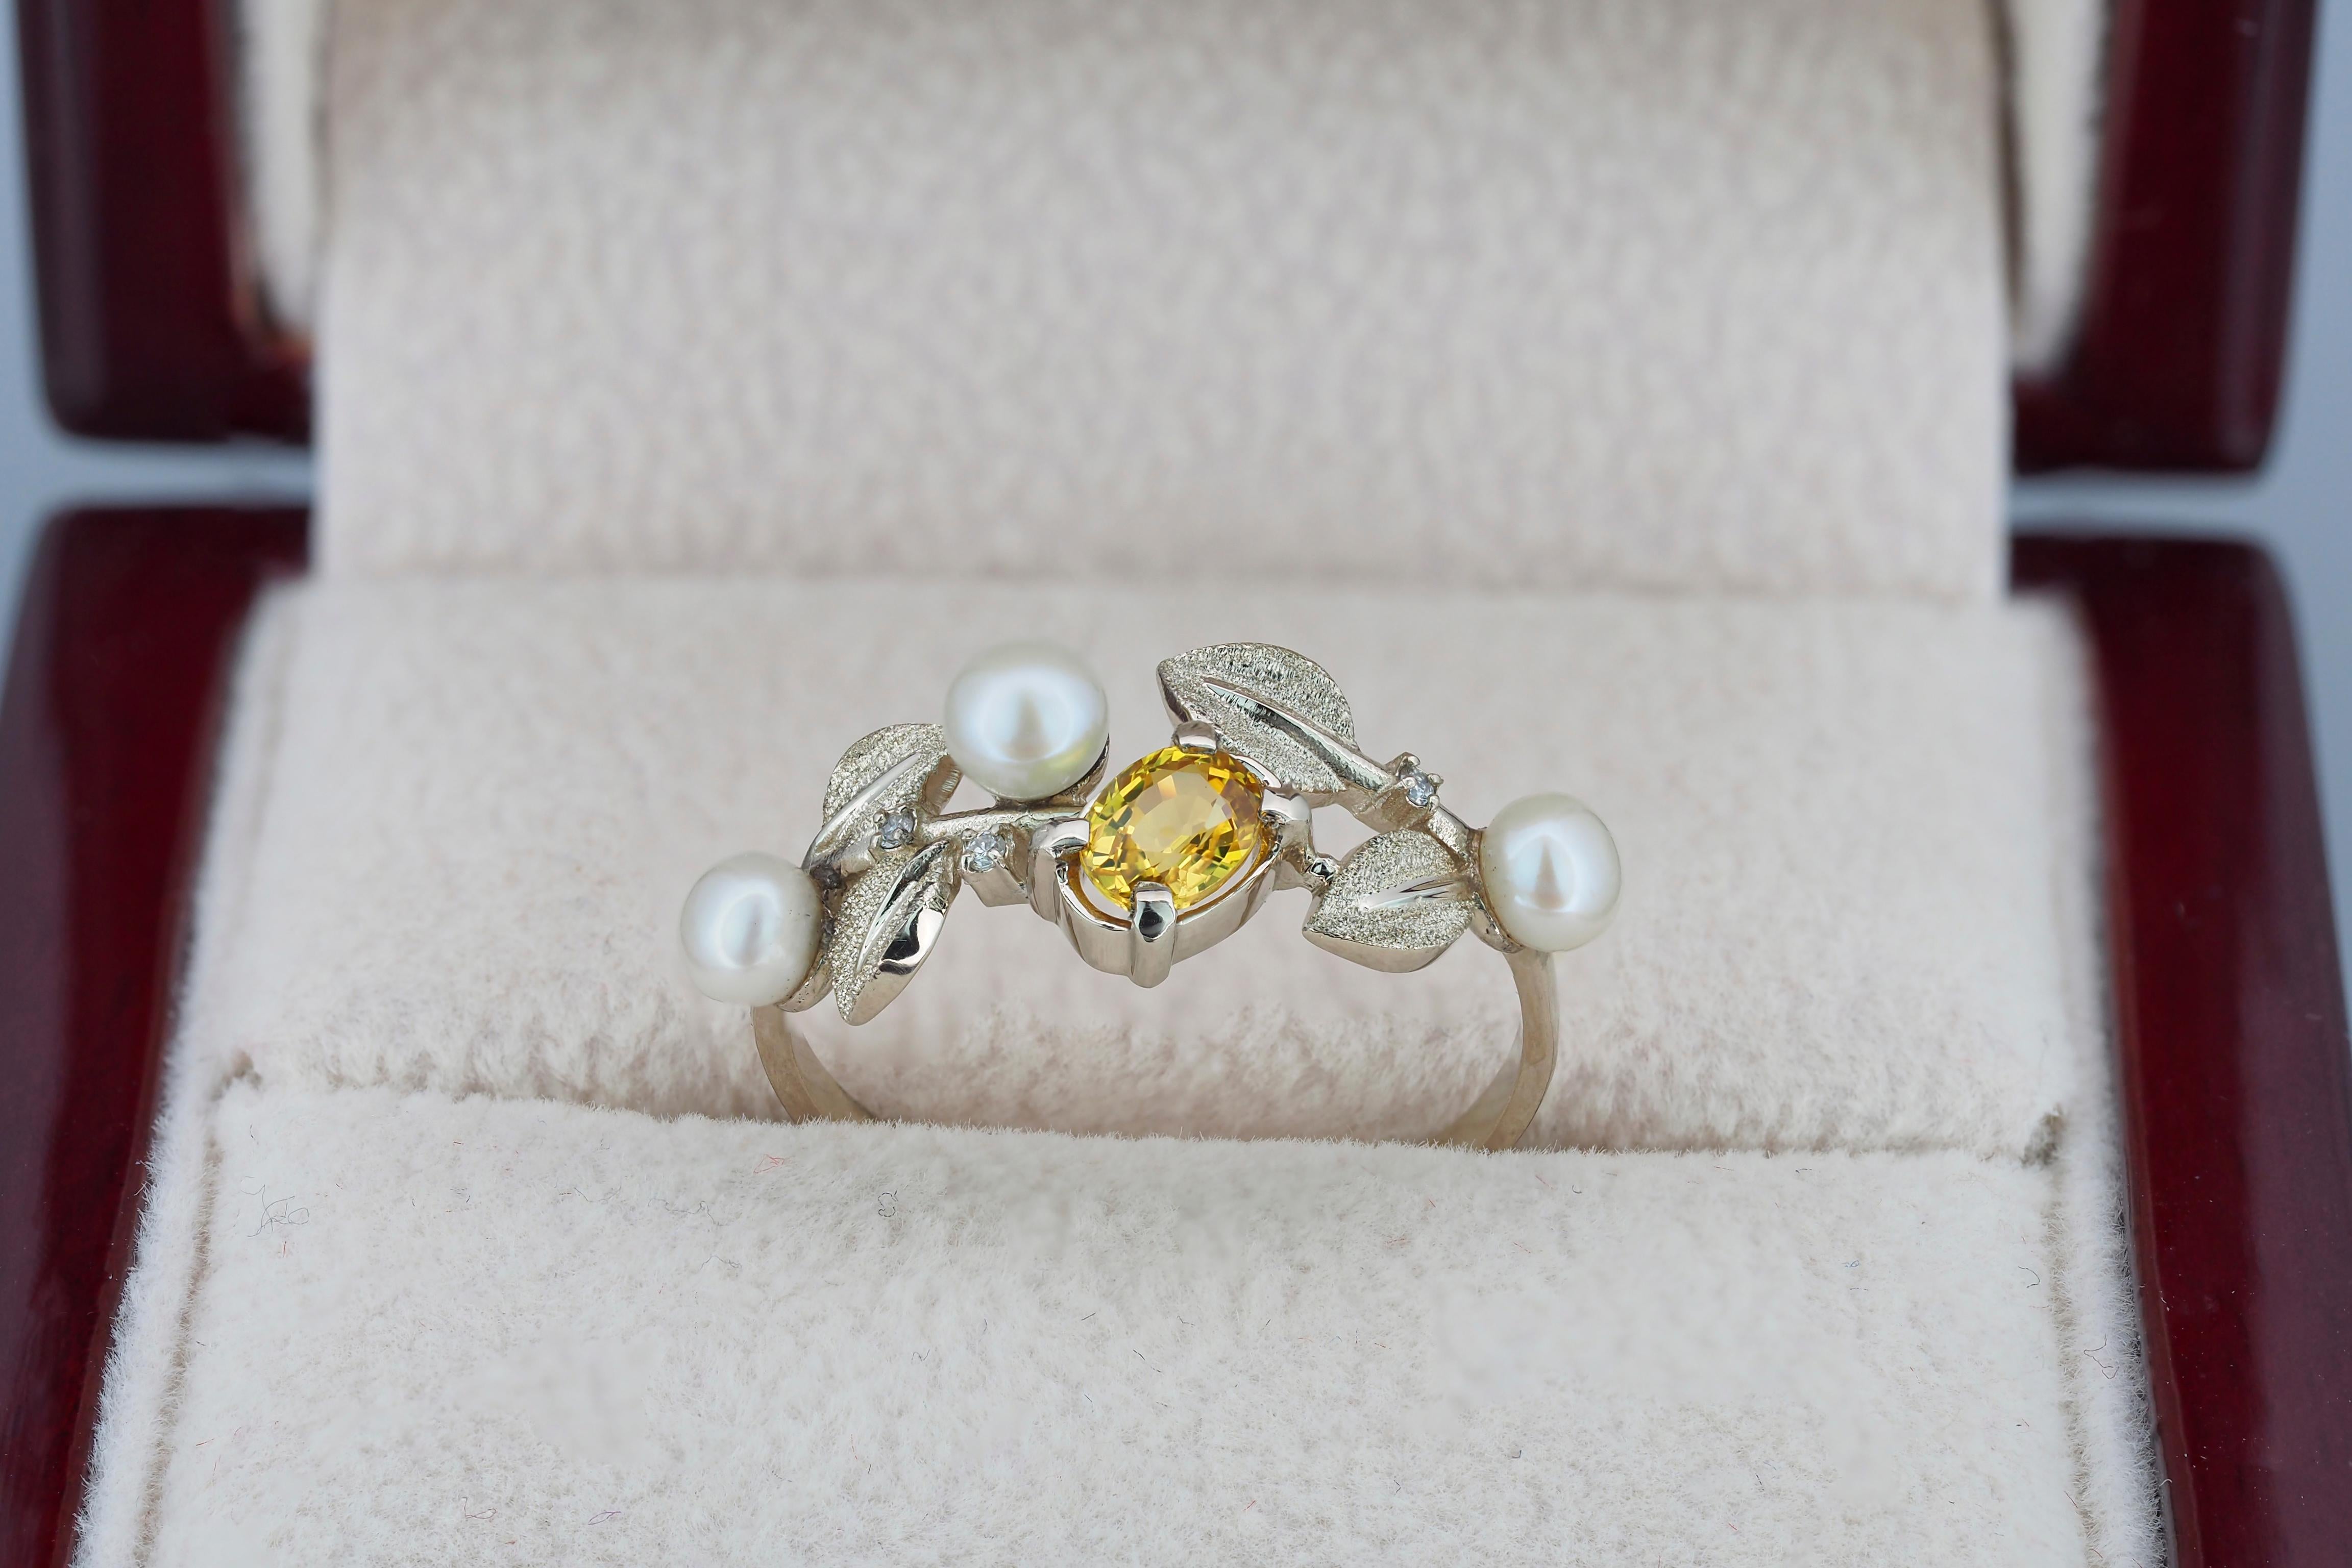 For Sale:  14k Gold Floral Ring with Sapphire, Diamonds and Pearls 5